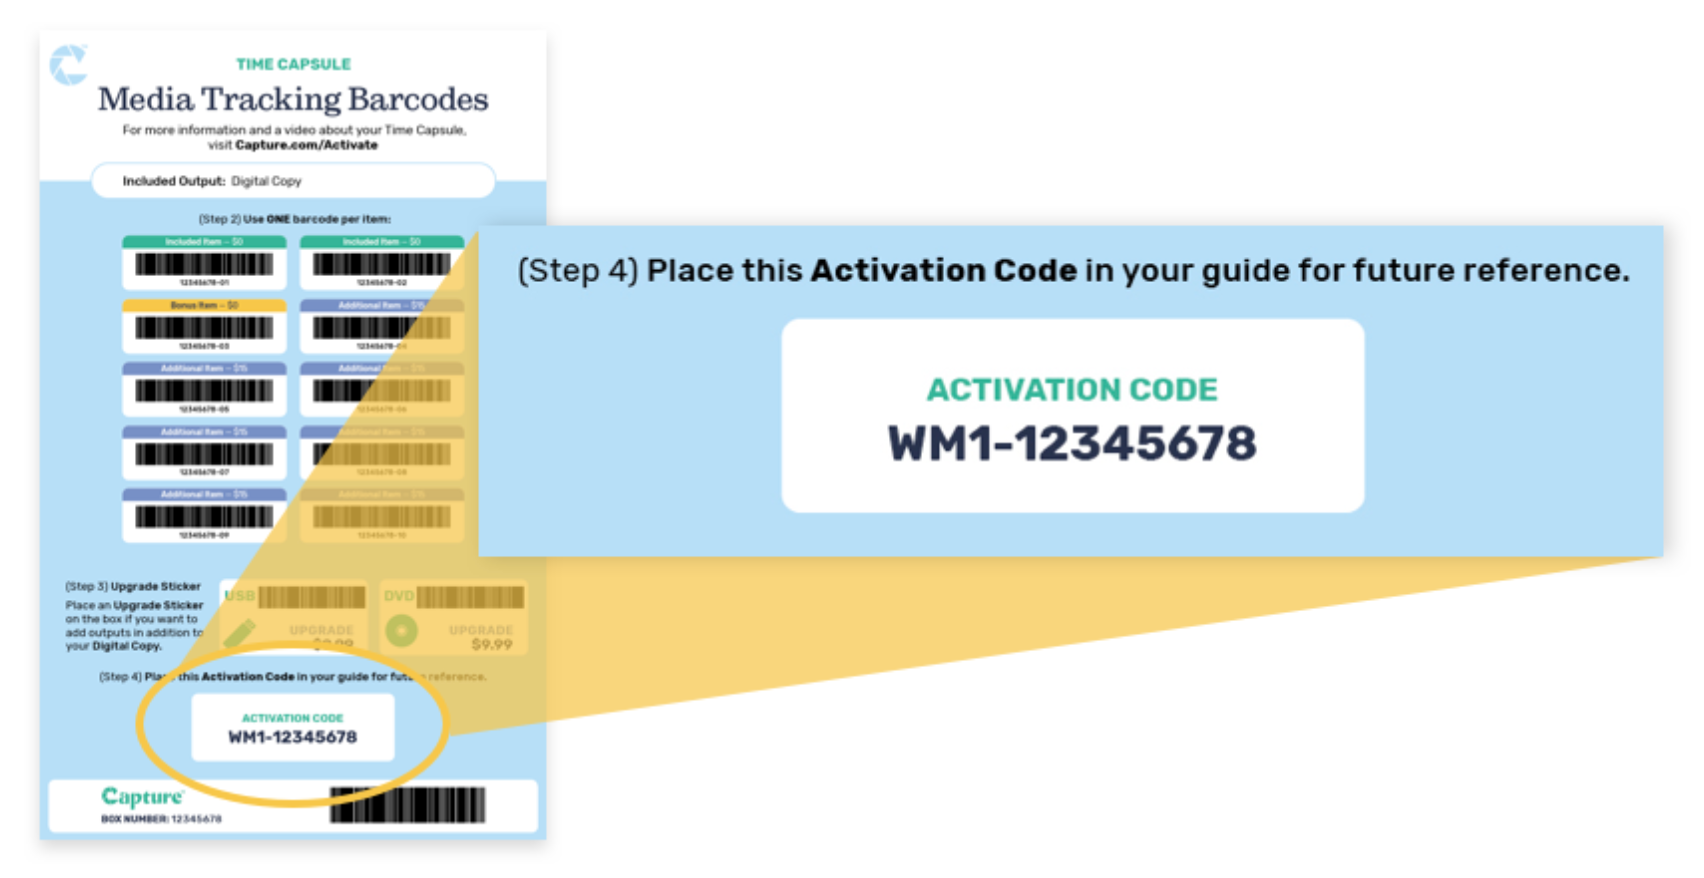 Image showing activation code at the bottom of the Media Tracking Barcode sheet